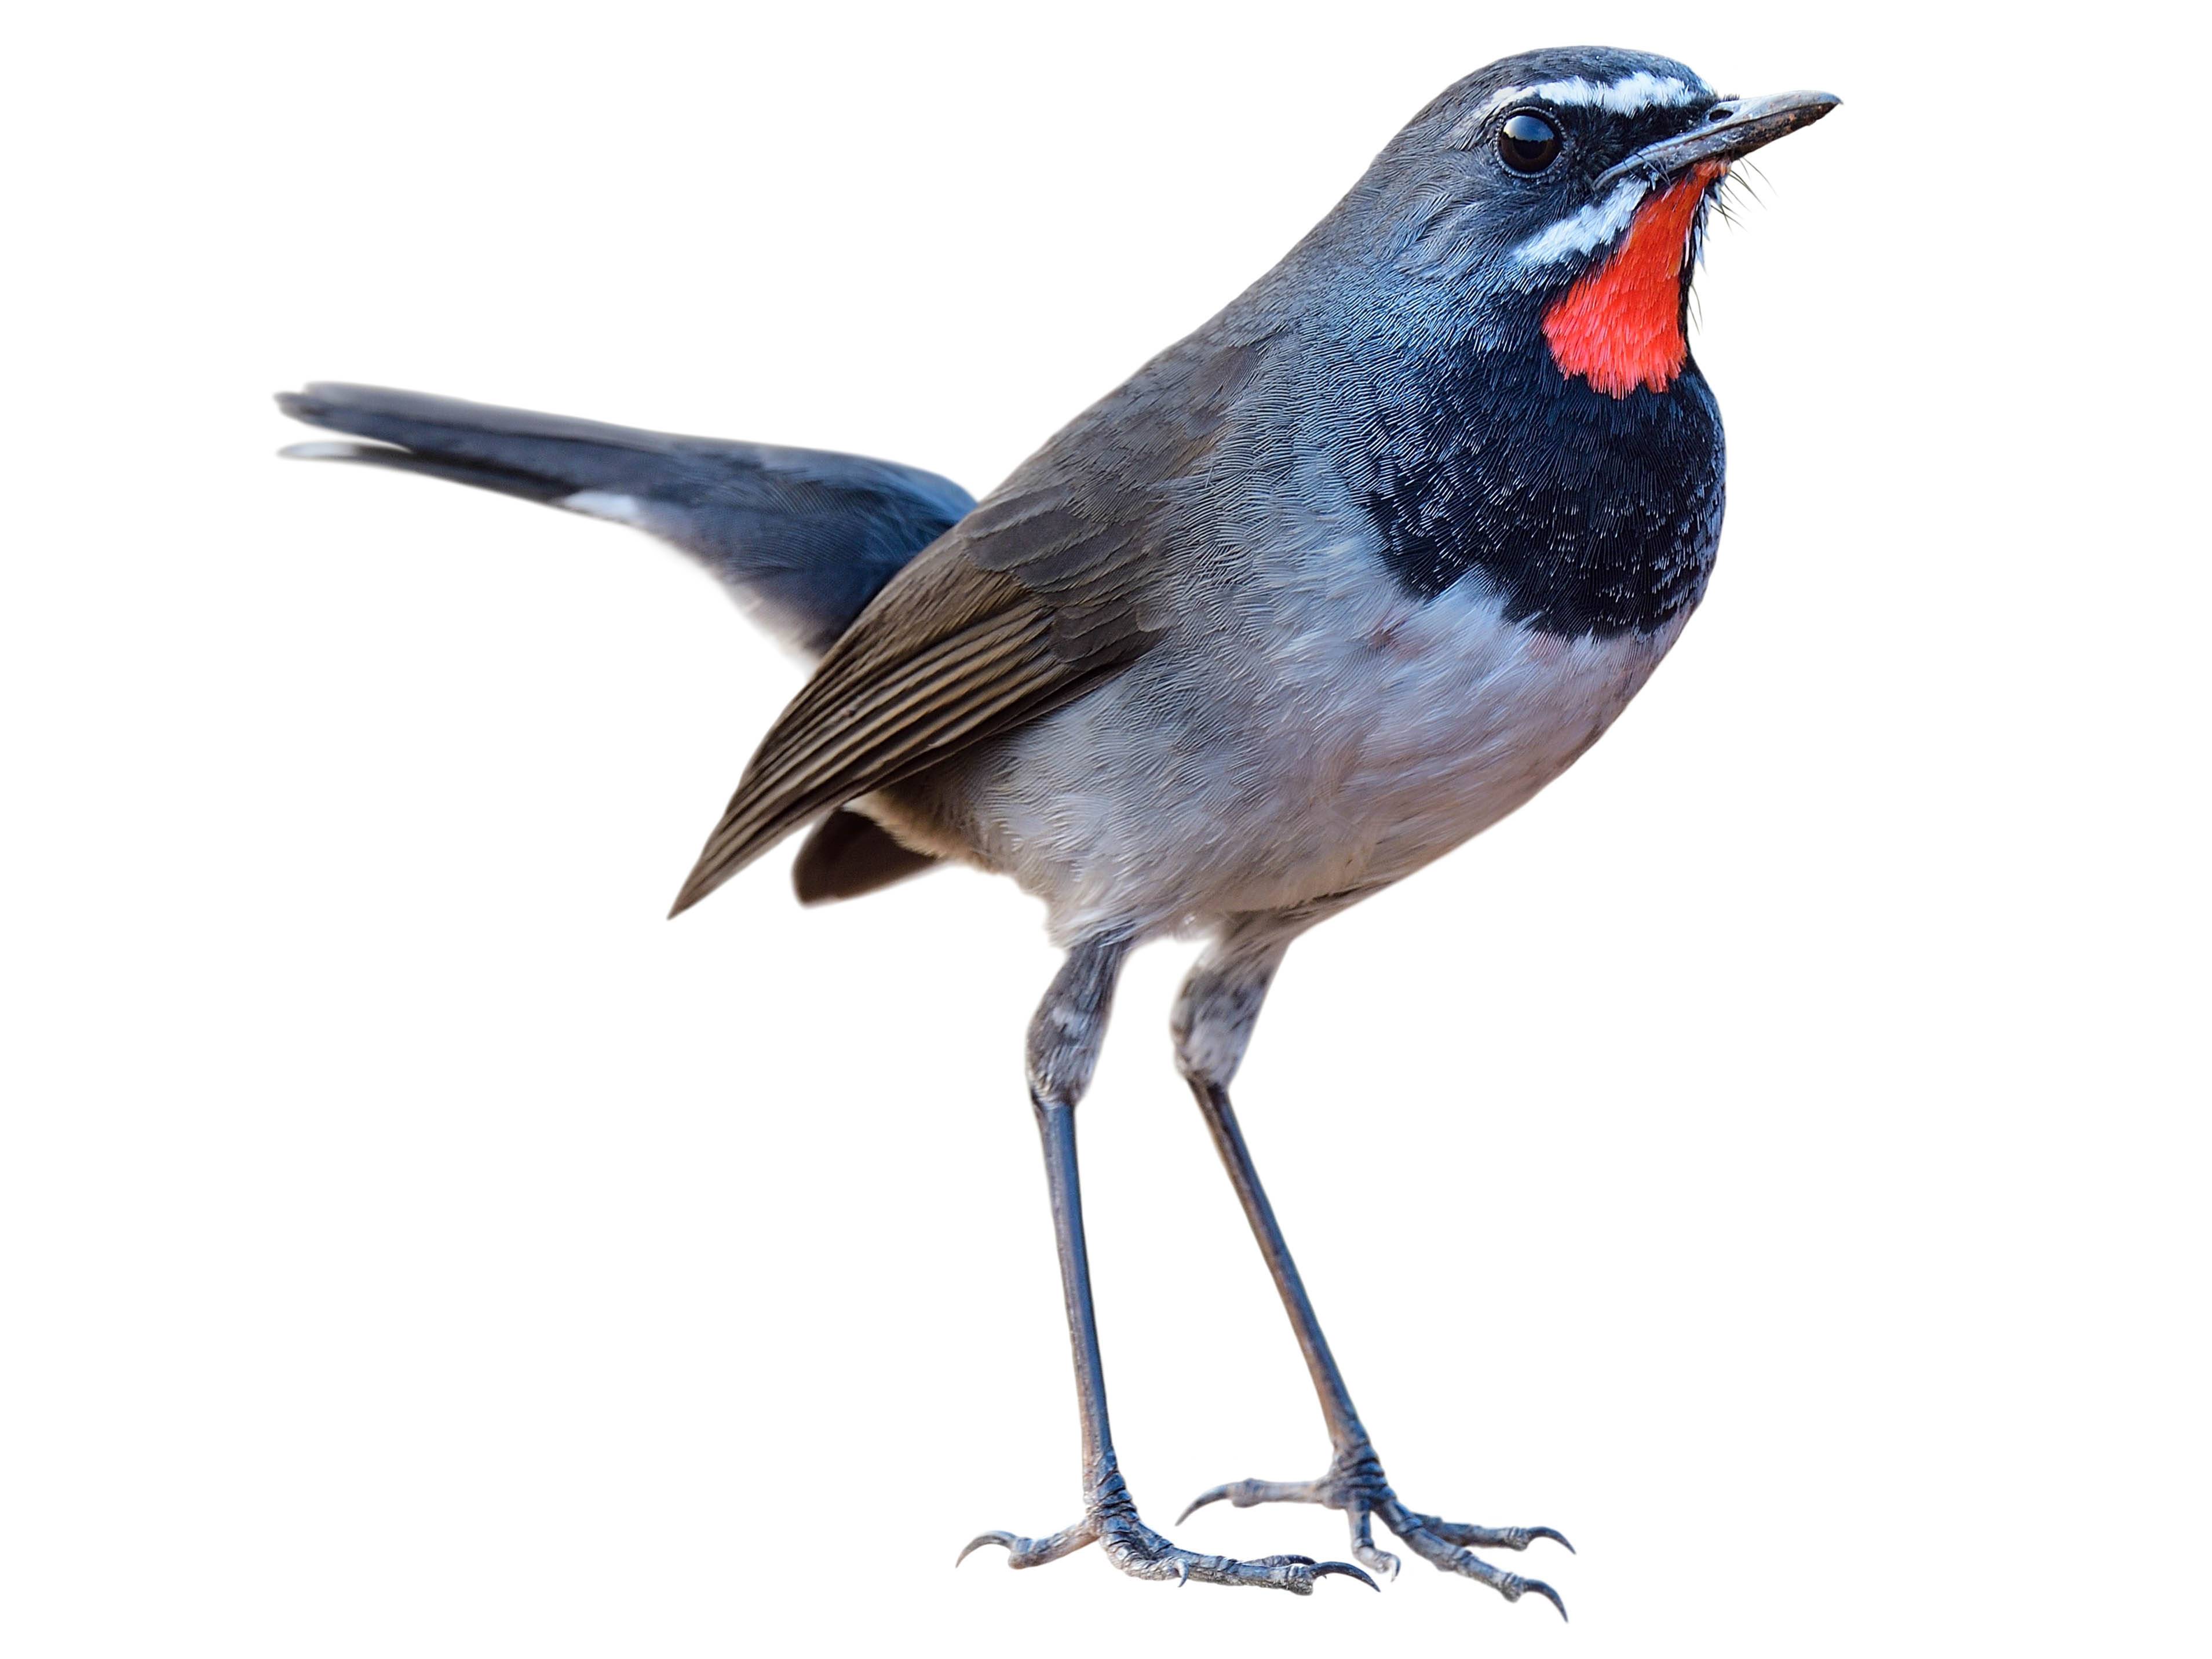 A photo of a Chinese Rubythroat (Calliope tschebaiewi), male